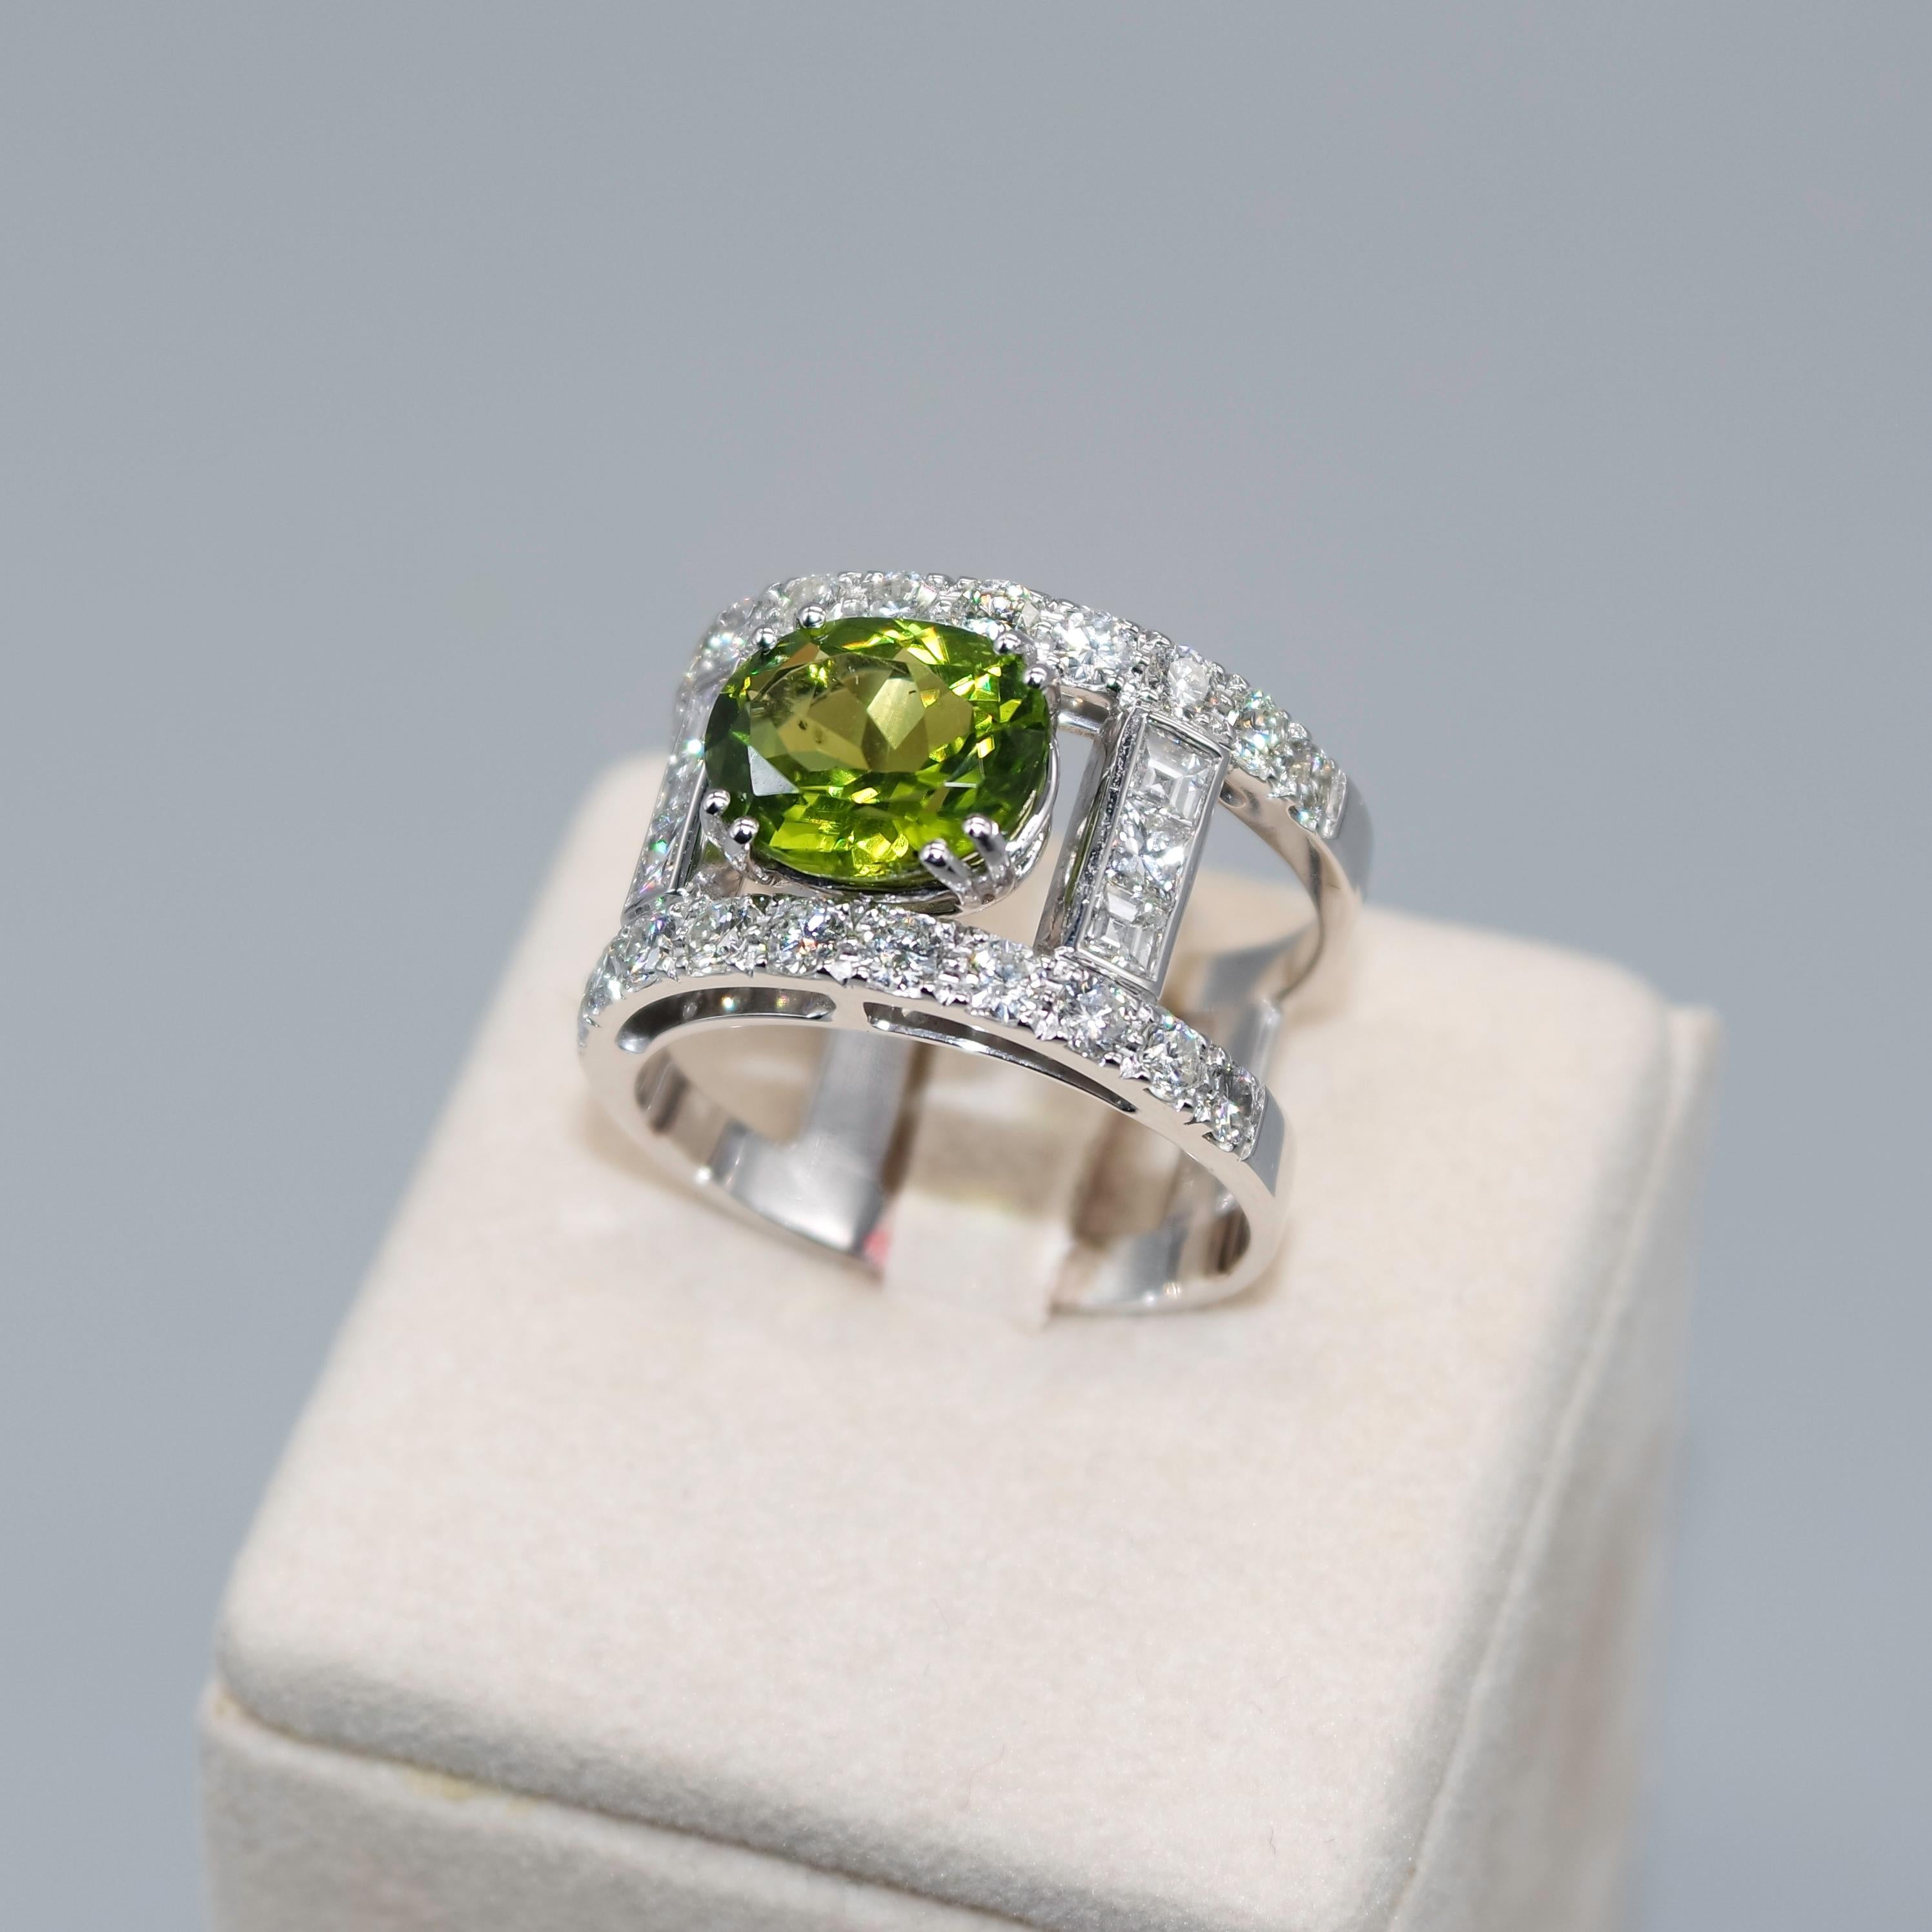 This spectacular cocktail ring is magnified by this light intense transparent yellowish green  oval faceted peridot of 3.69 carats with 18 karat white gold. 
The ring construction enhances the beauty and unicity of the central stone, well set with 8